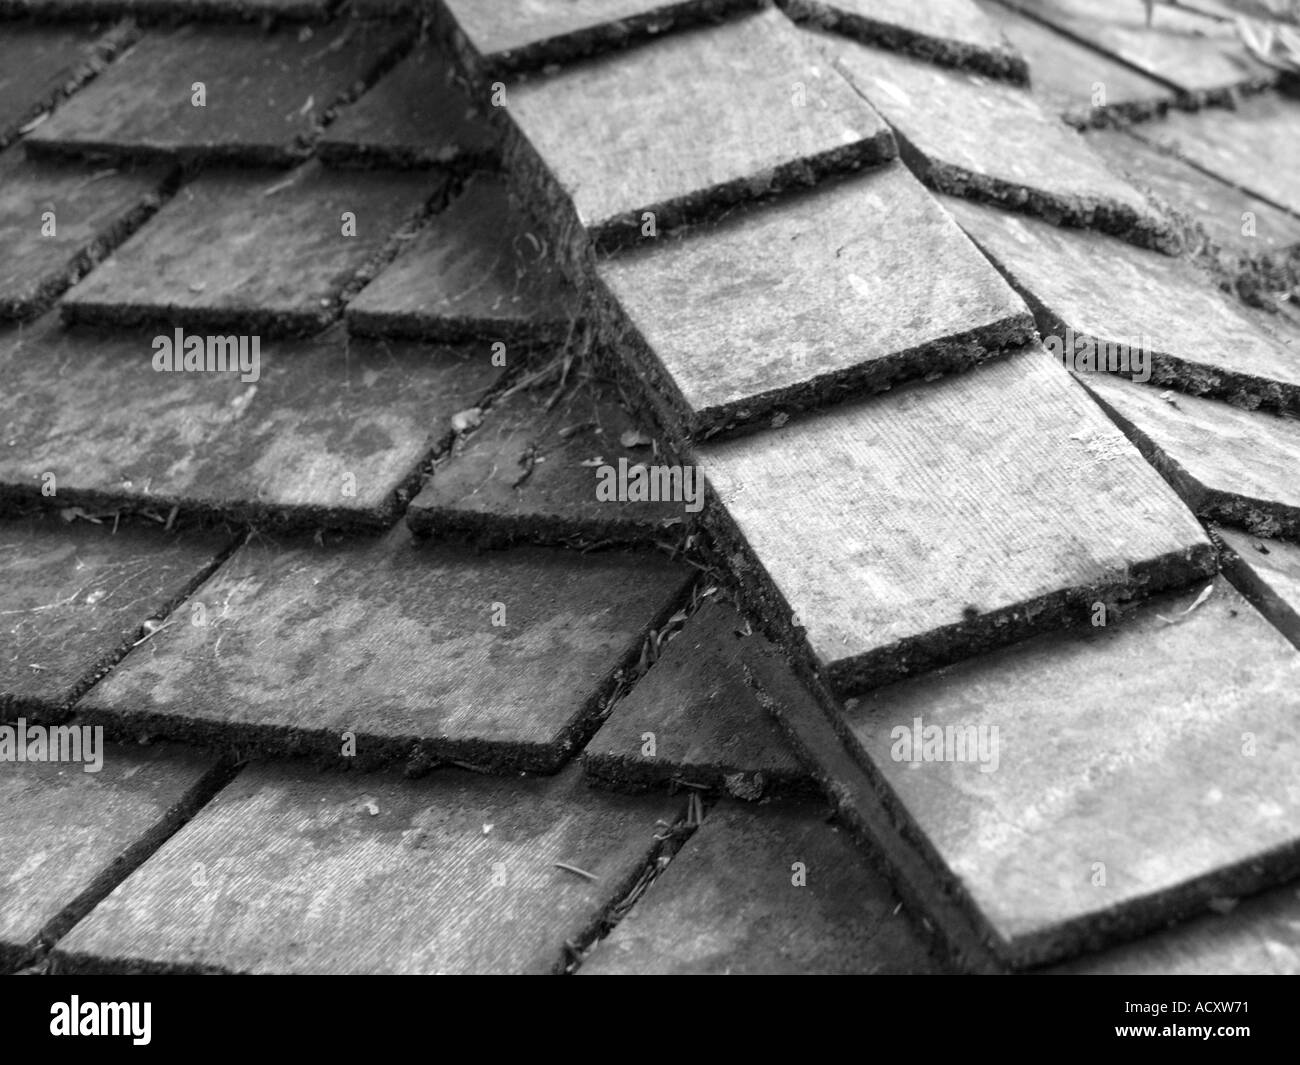 Wooden tiles on a roof Stock Photo